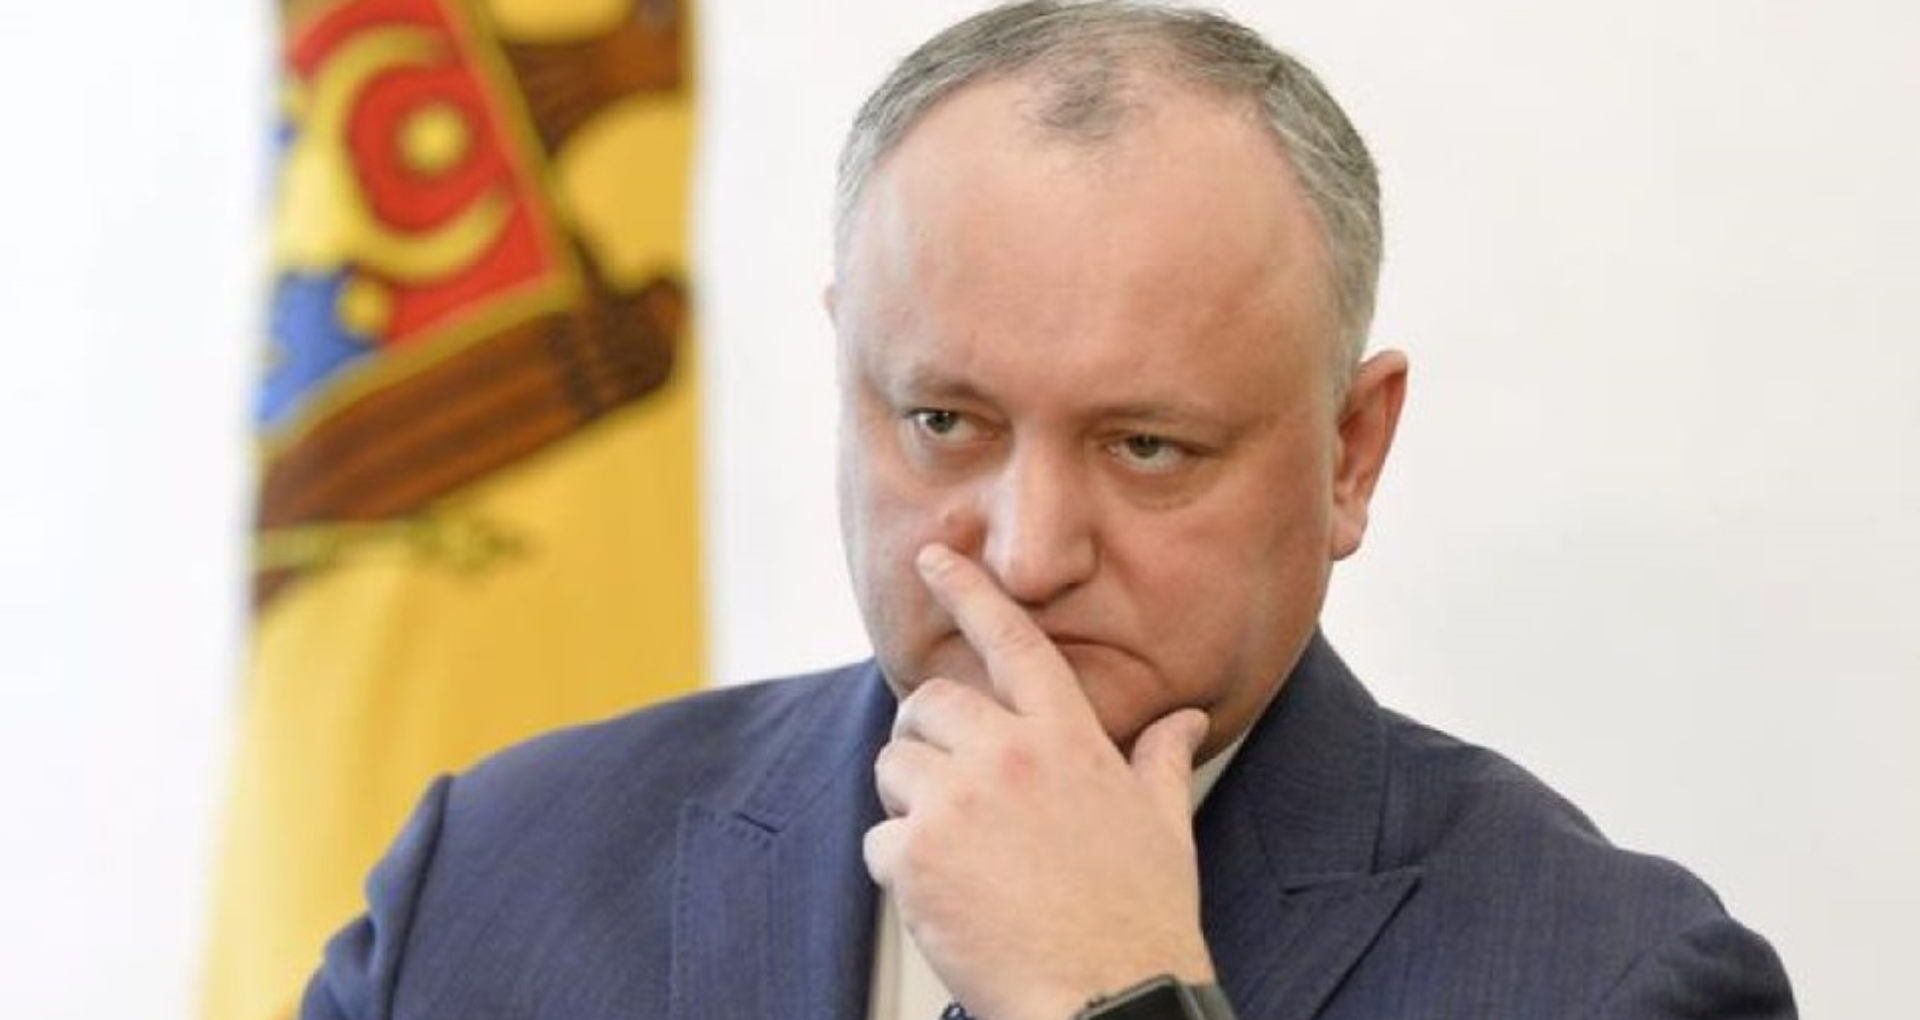 Association of Judges of the Republic of Moldova, after several officials criticized the decisions of the SCJ to annul the decisions of the Pre-Vetting Commission: “Political influences have no place in the sphere of justice”